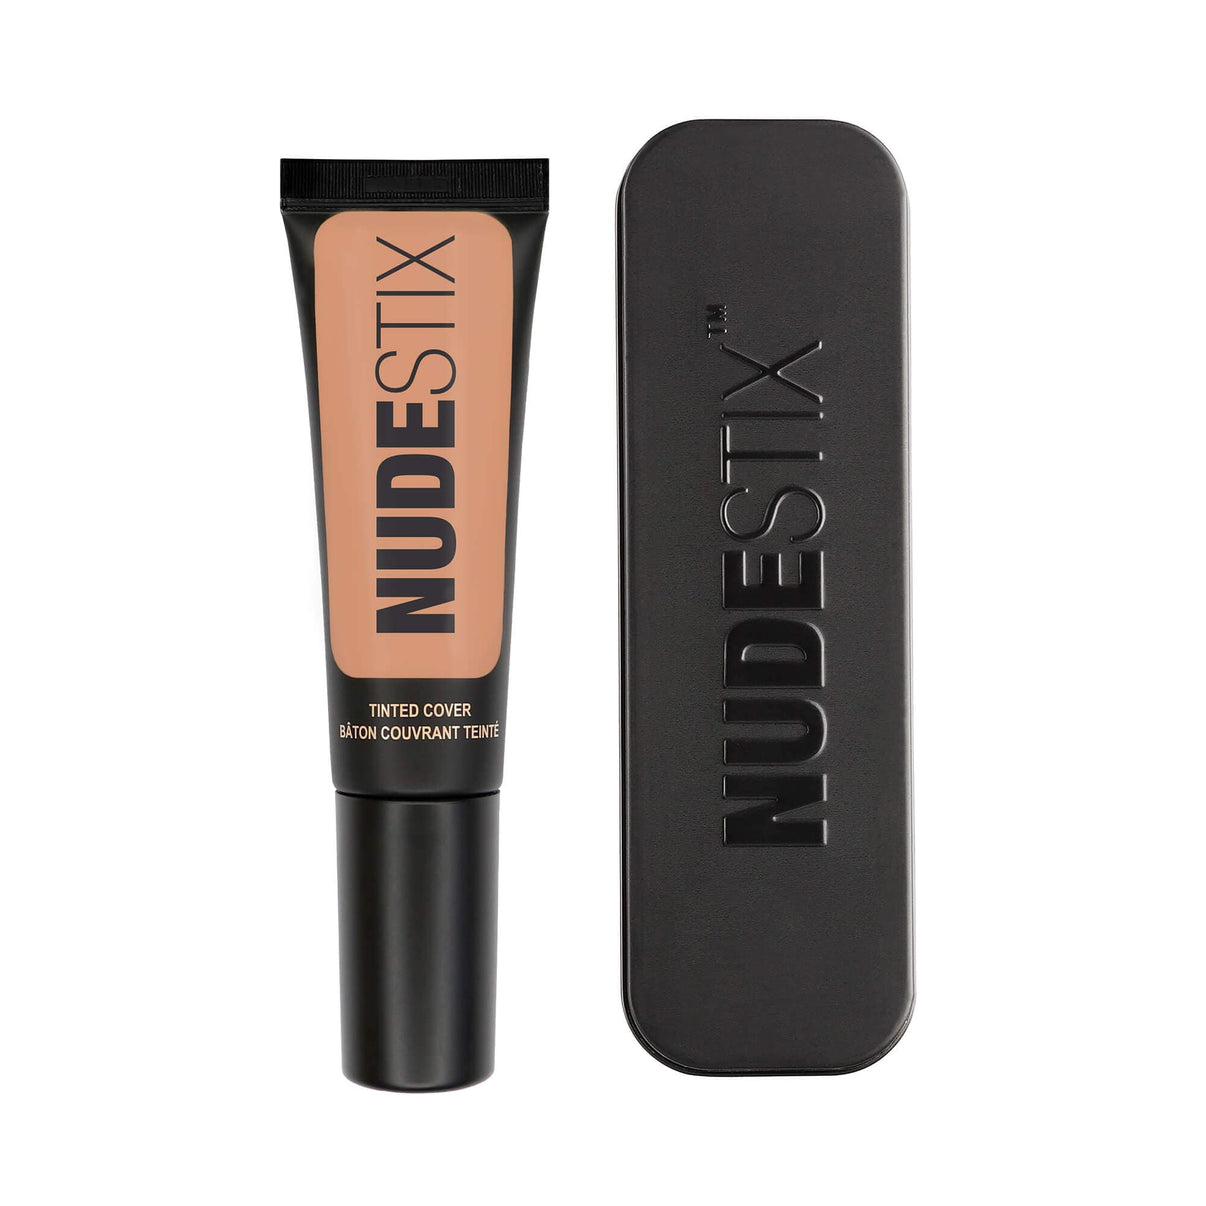 Tinted Cover Liquid Foundation in shade nude 5 with Nudestix can